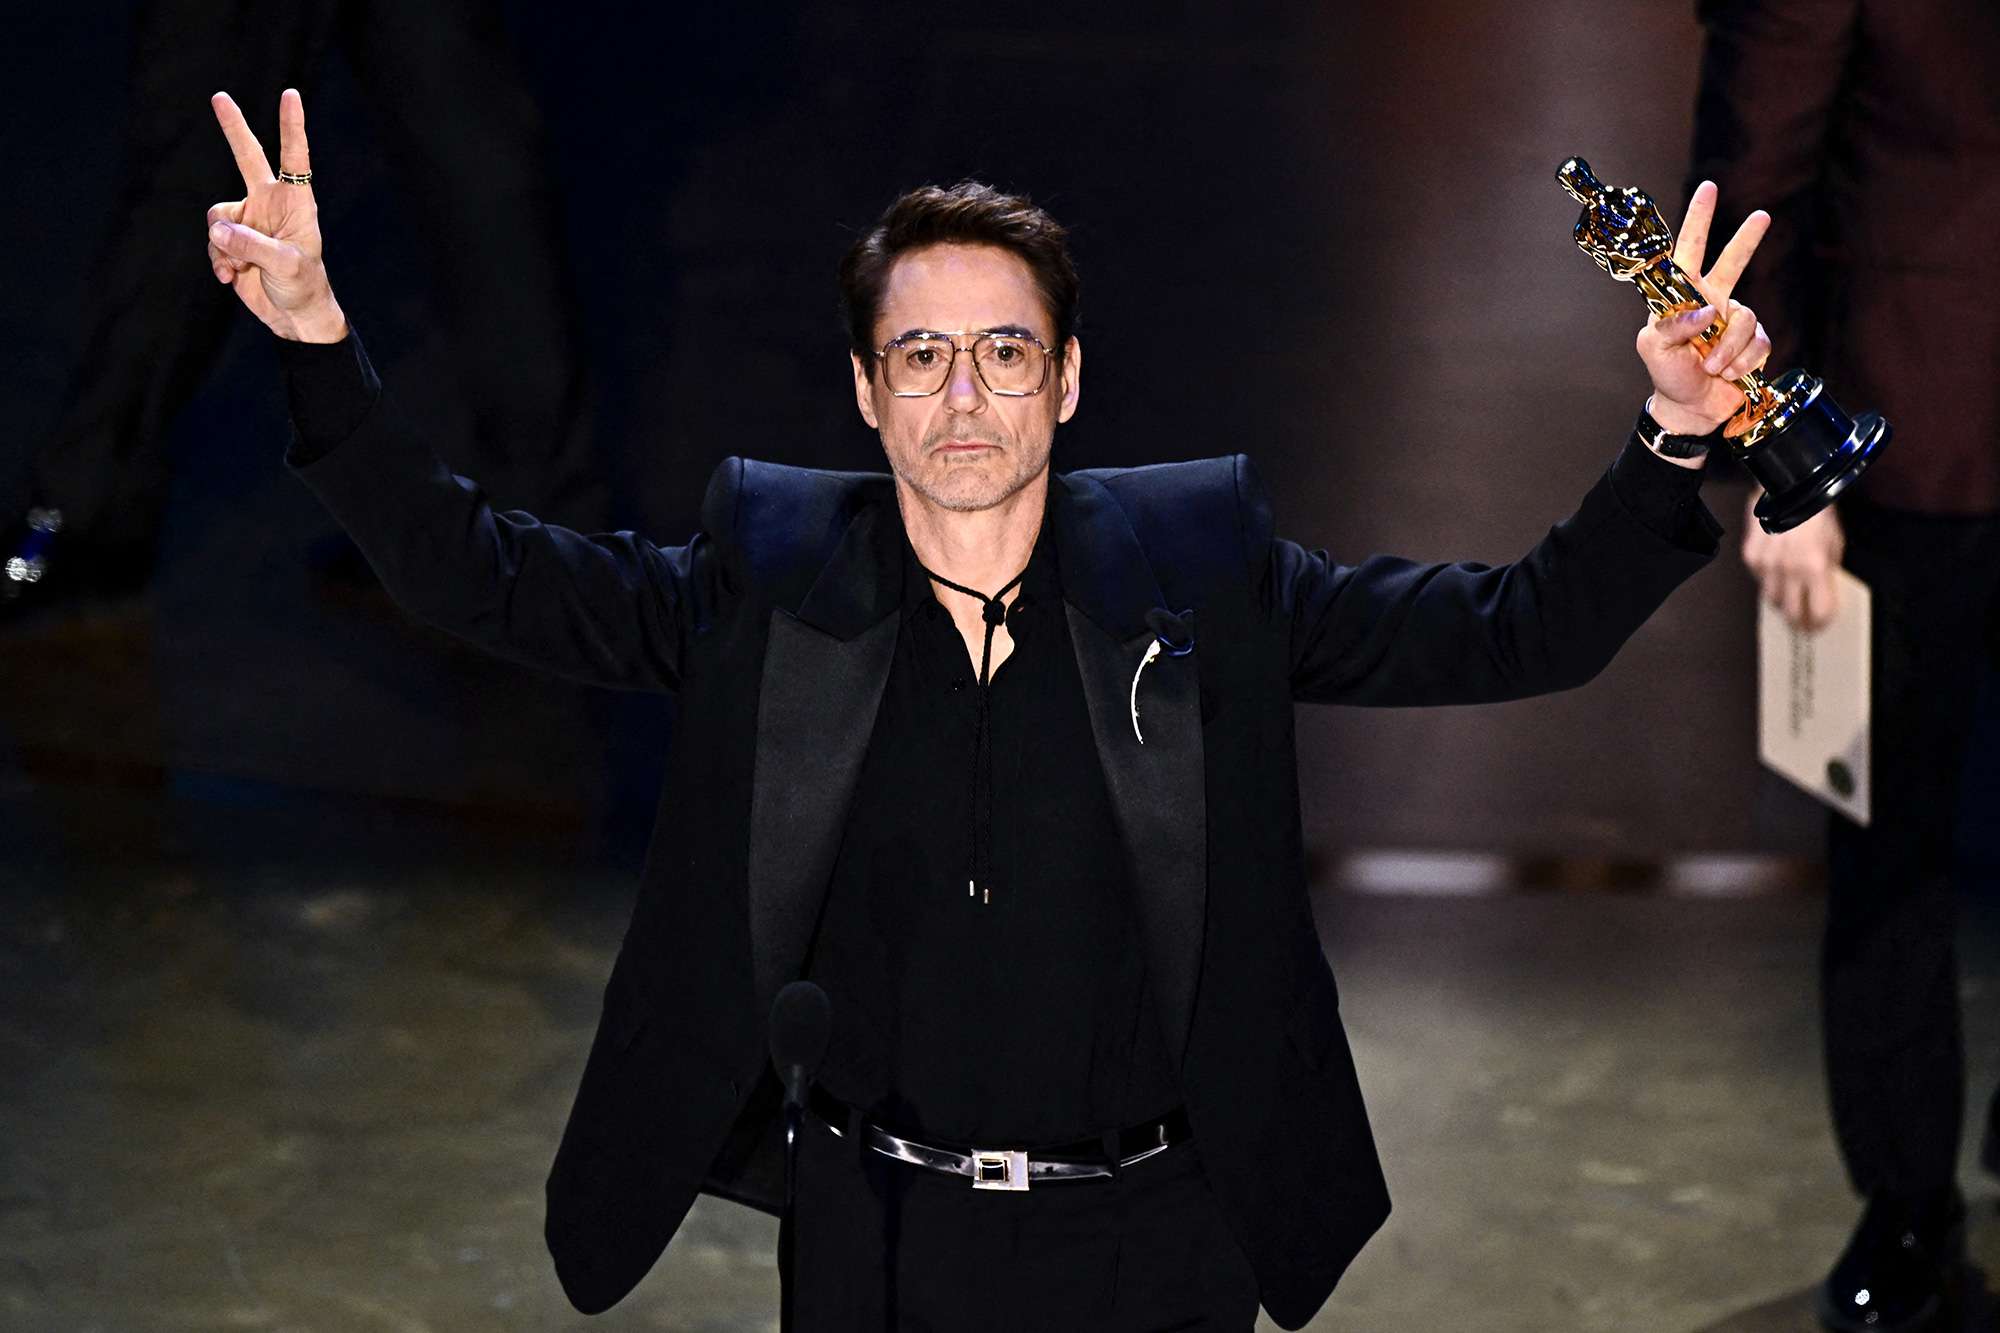 Robert Downey Jr. accepts the award for Best Actor in a Supporting Role for "Oppenheimer" onstage during the 96th Annual Academy Awards at the Dolby Theatre in Hollywood, California on March 10, 2024.